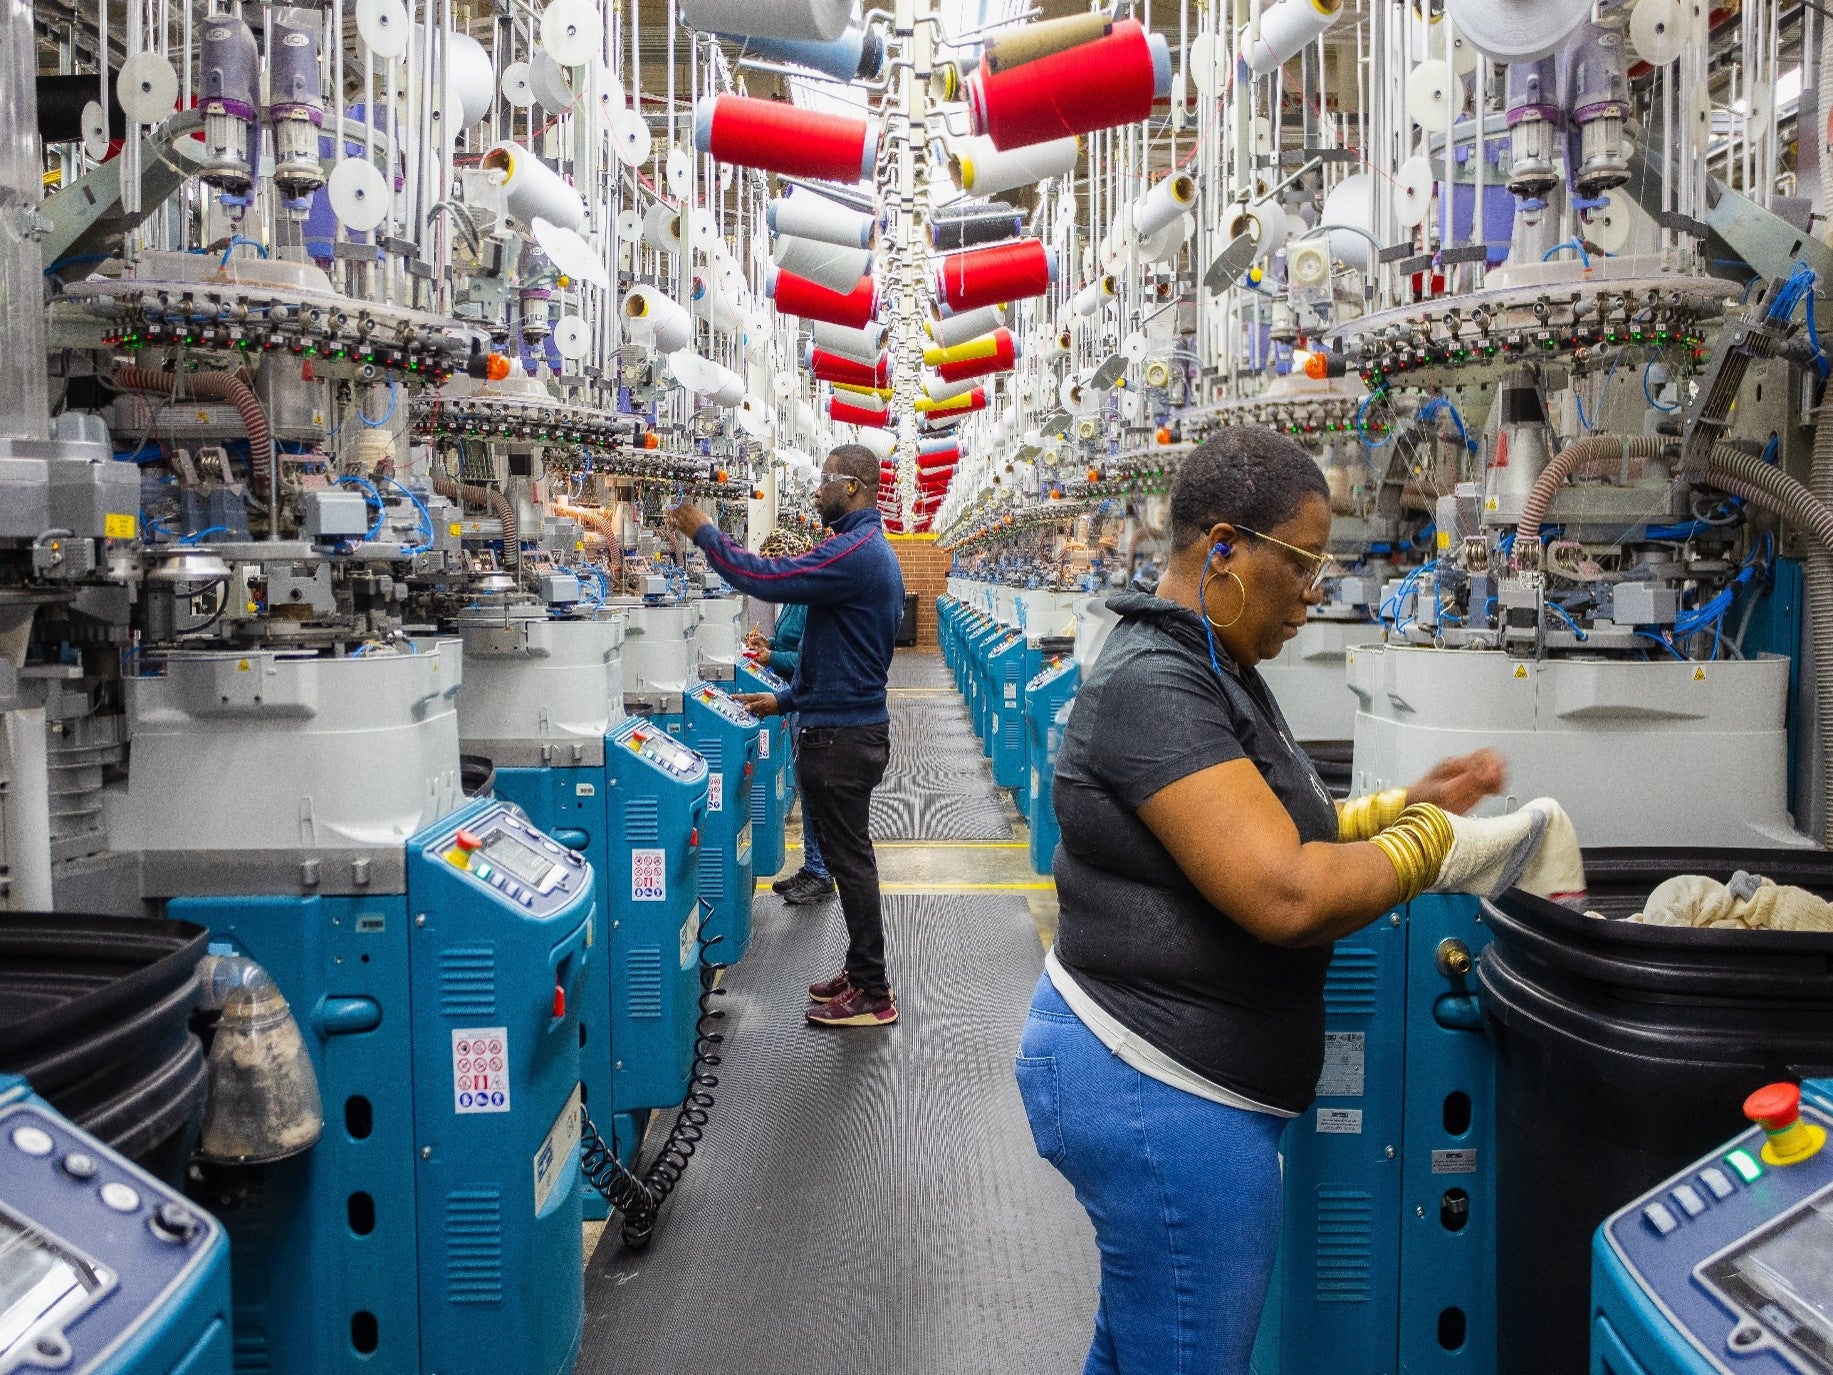 Two rows of sock knitting machines, and a few employees that operate them